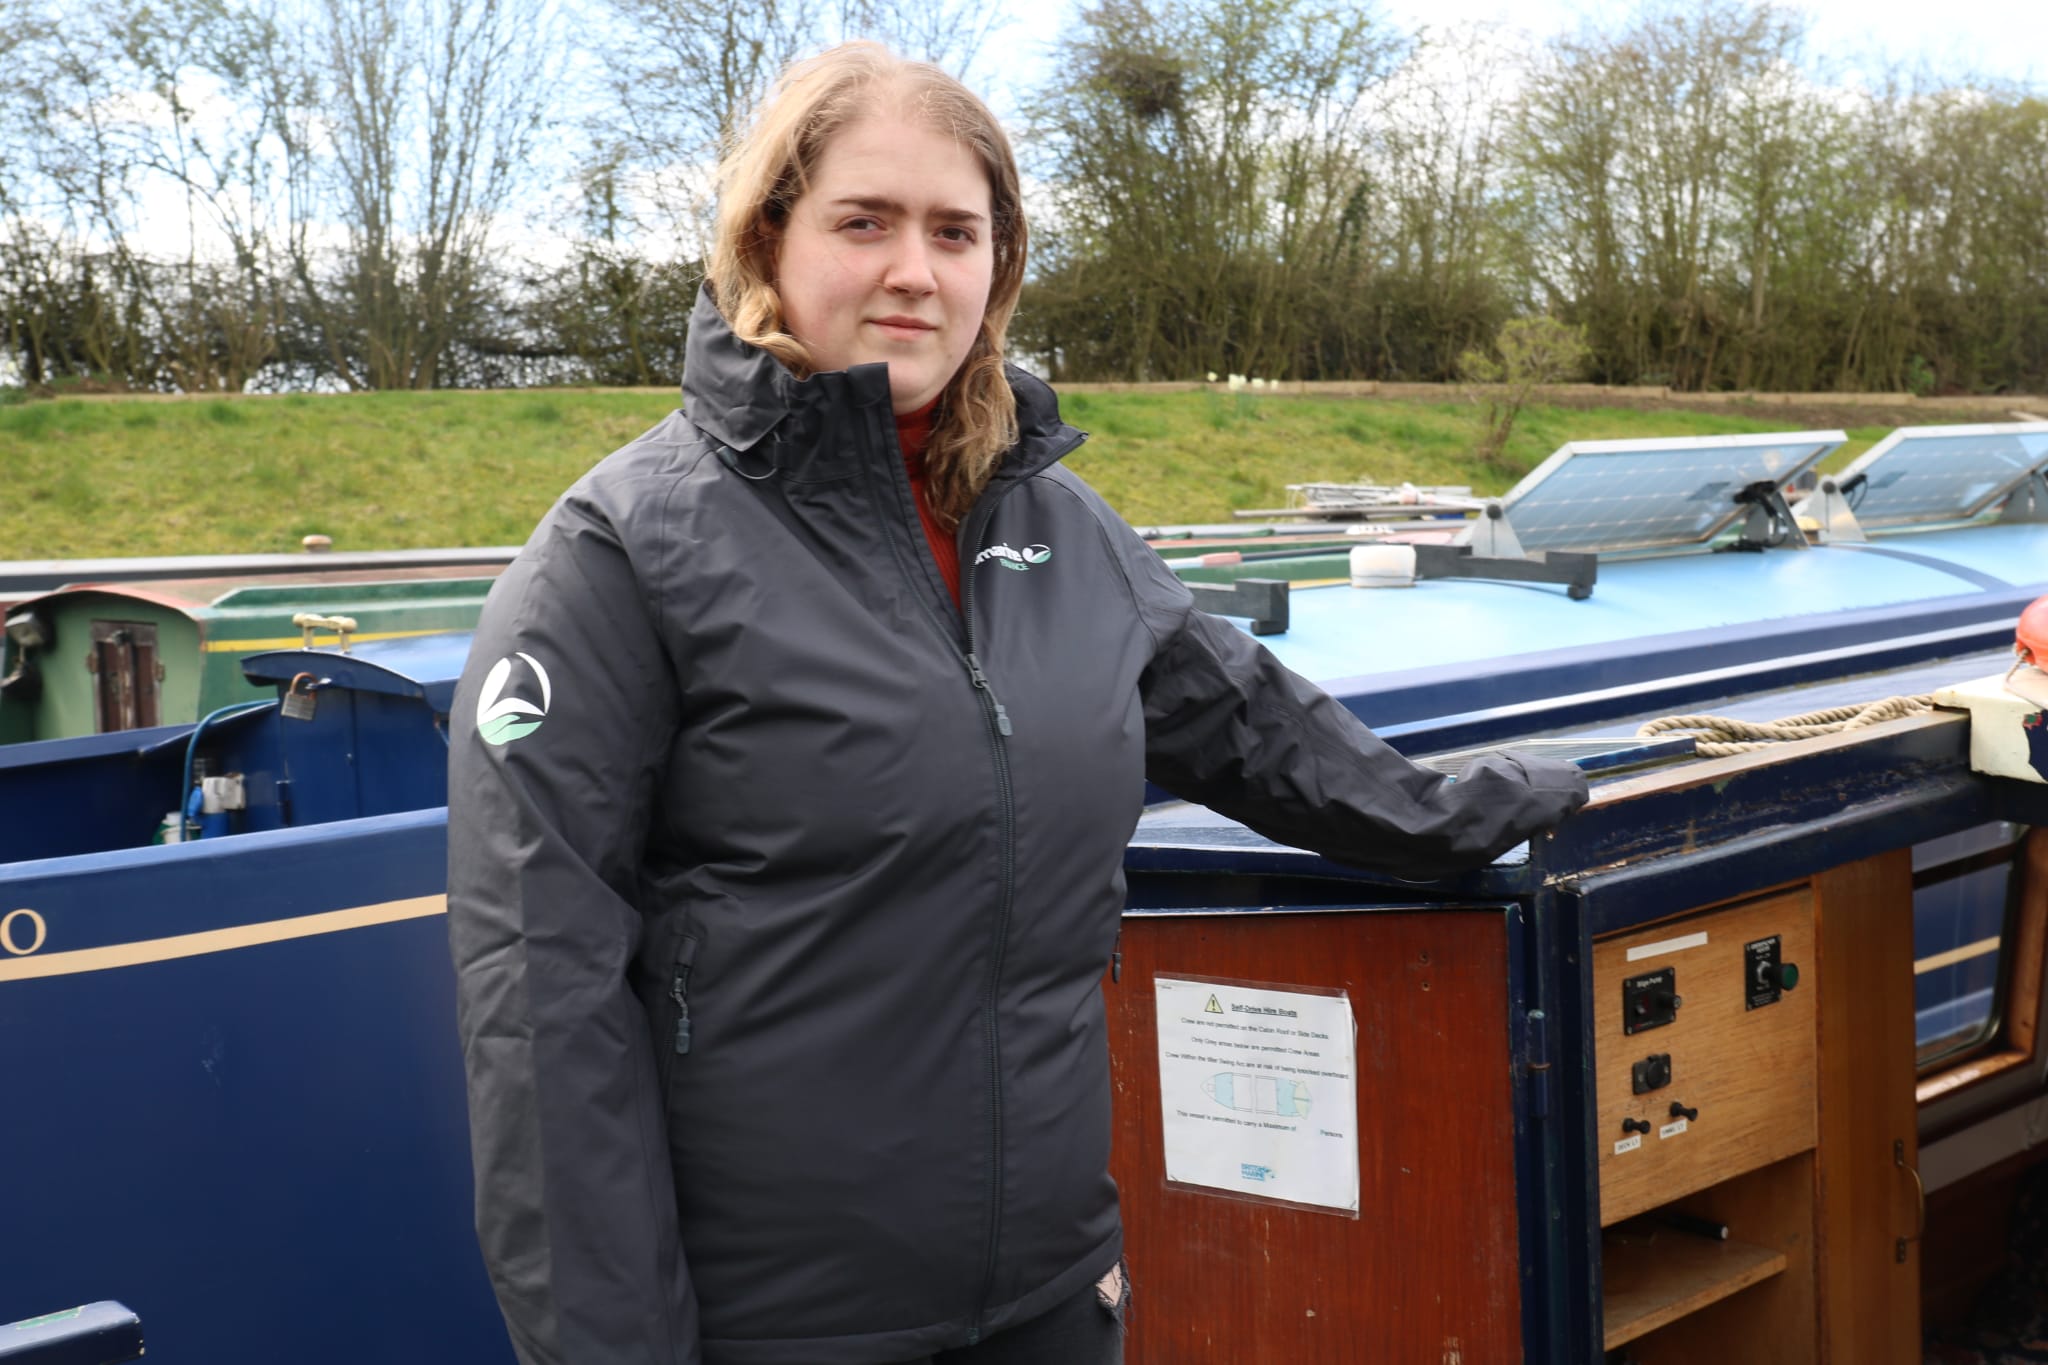 abigail ward stood in front of her new liveaboard boat